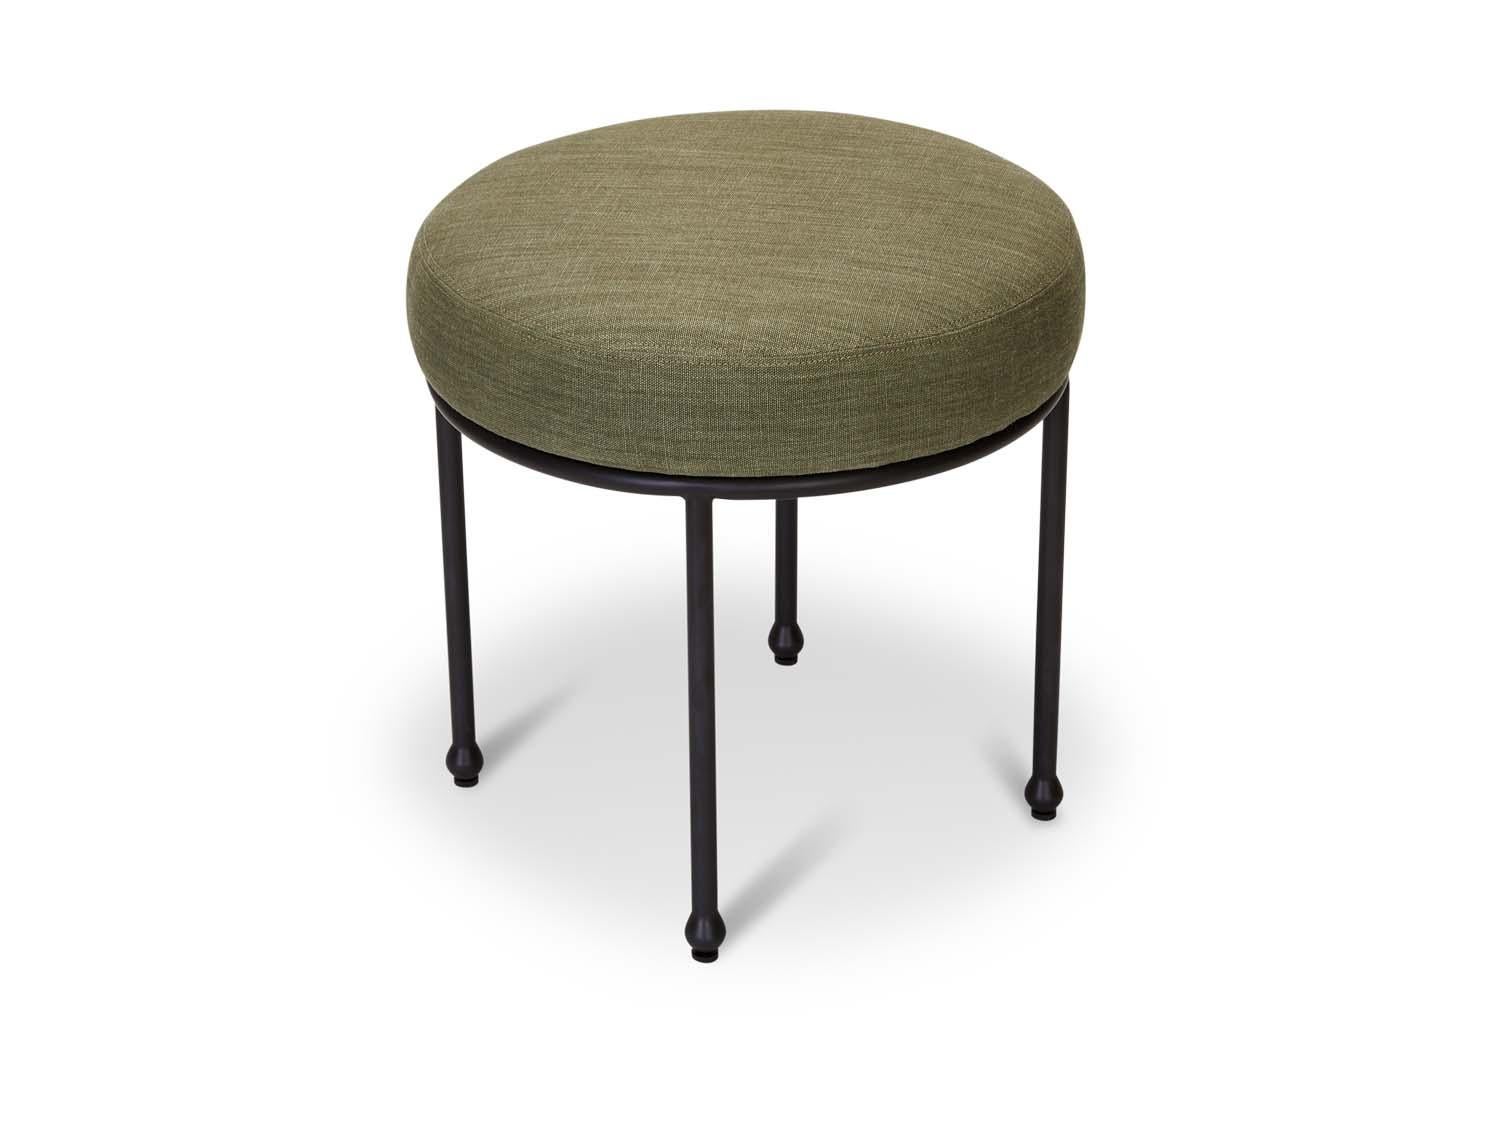 The Petite Orsini Ottoman features a minimal metal base with decorative ball feet and an upholstered seat. 

The Lawson-Fenning Collection is designed and handmade in Los Angeles, California.
Message us to find out which finishes are currently in